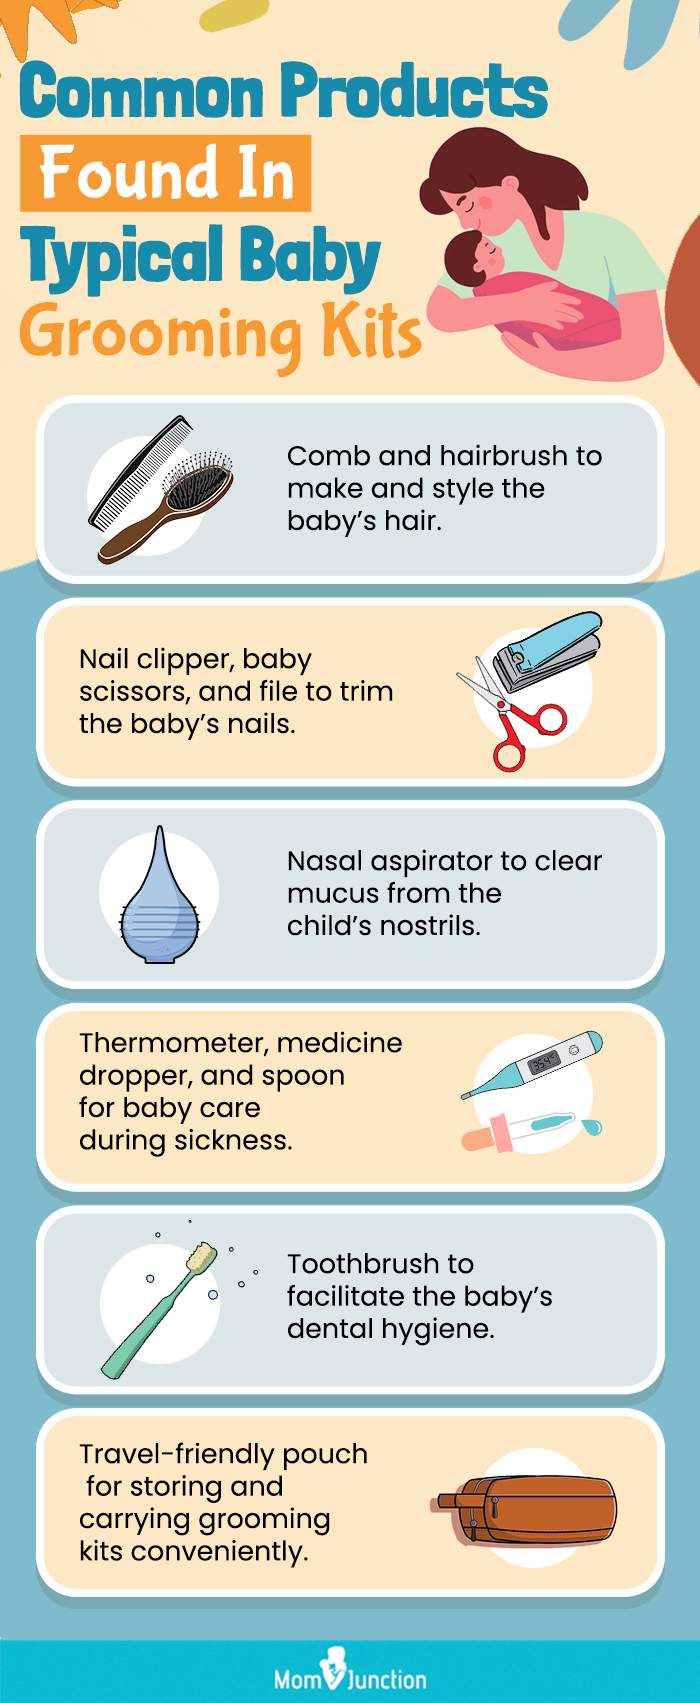 Common Products Found In Typical Baby Grooming Kits (infographic)